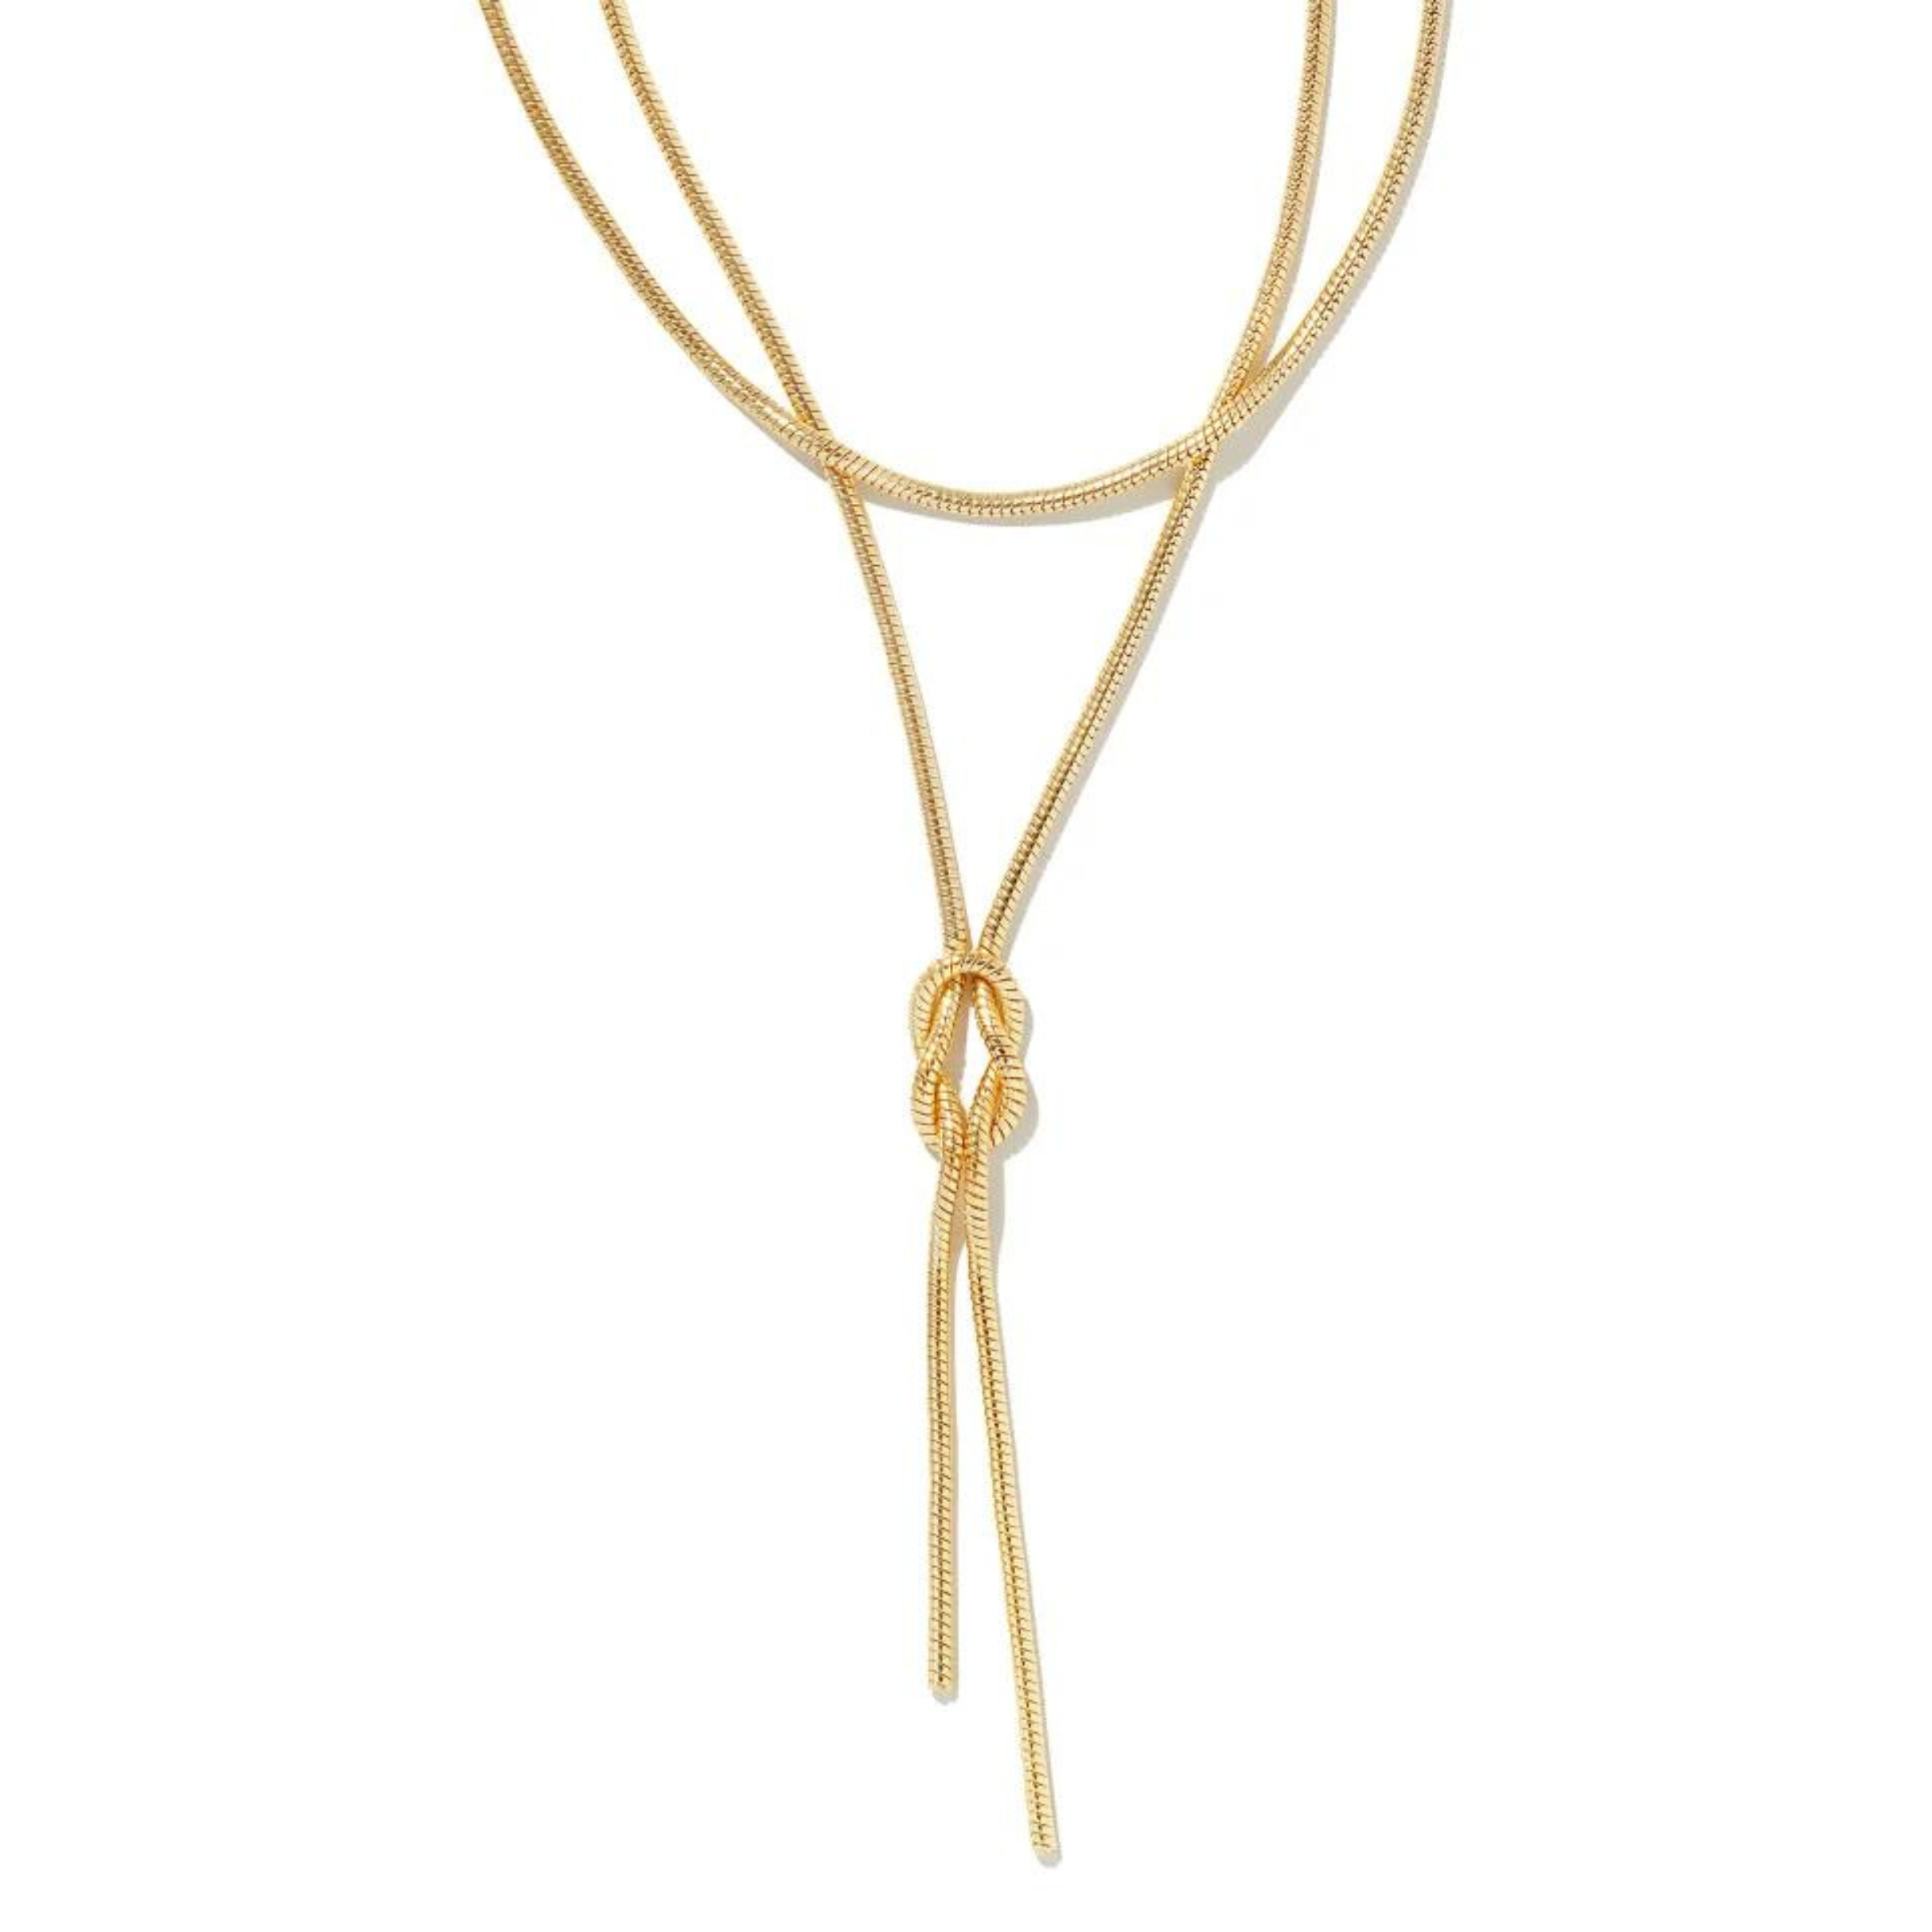 Gold necklace with two layers and has a tied knot towards the bottom. This necklace is pictured on a white background. 